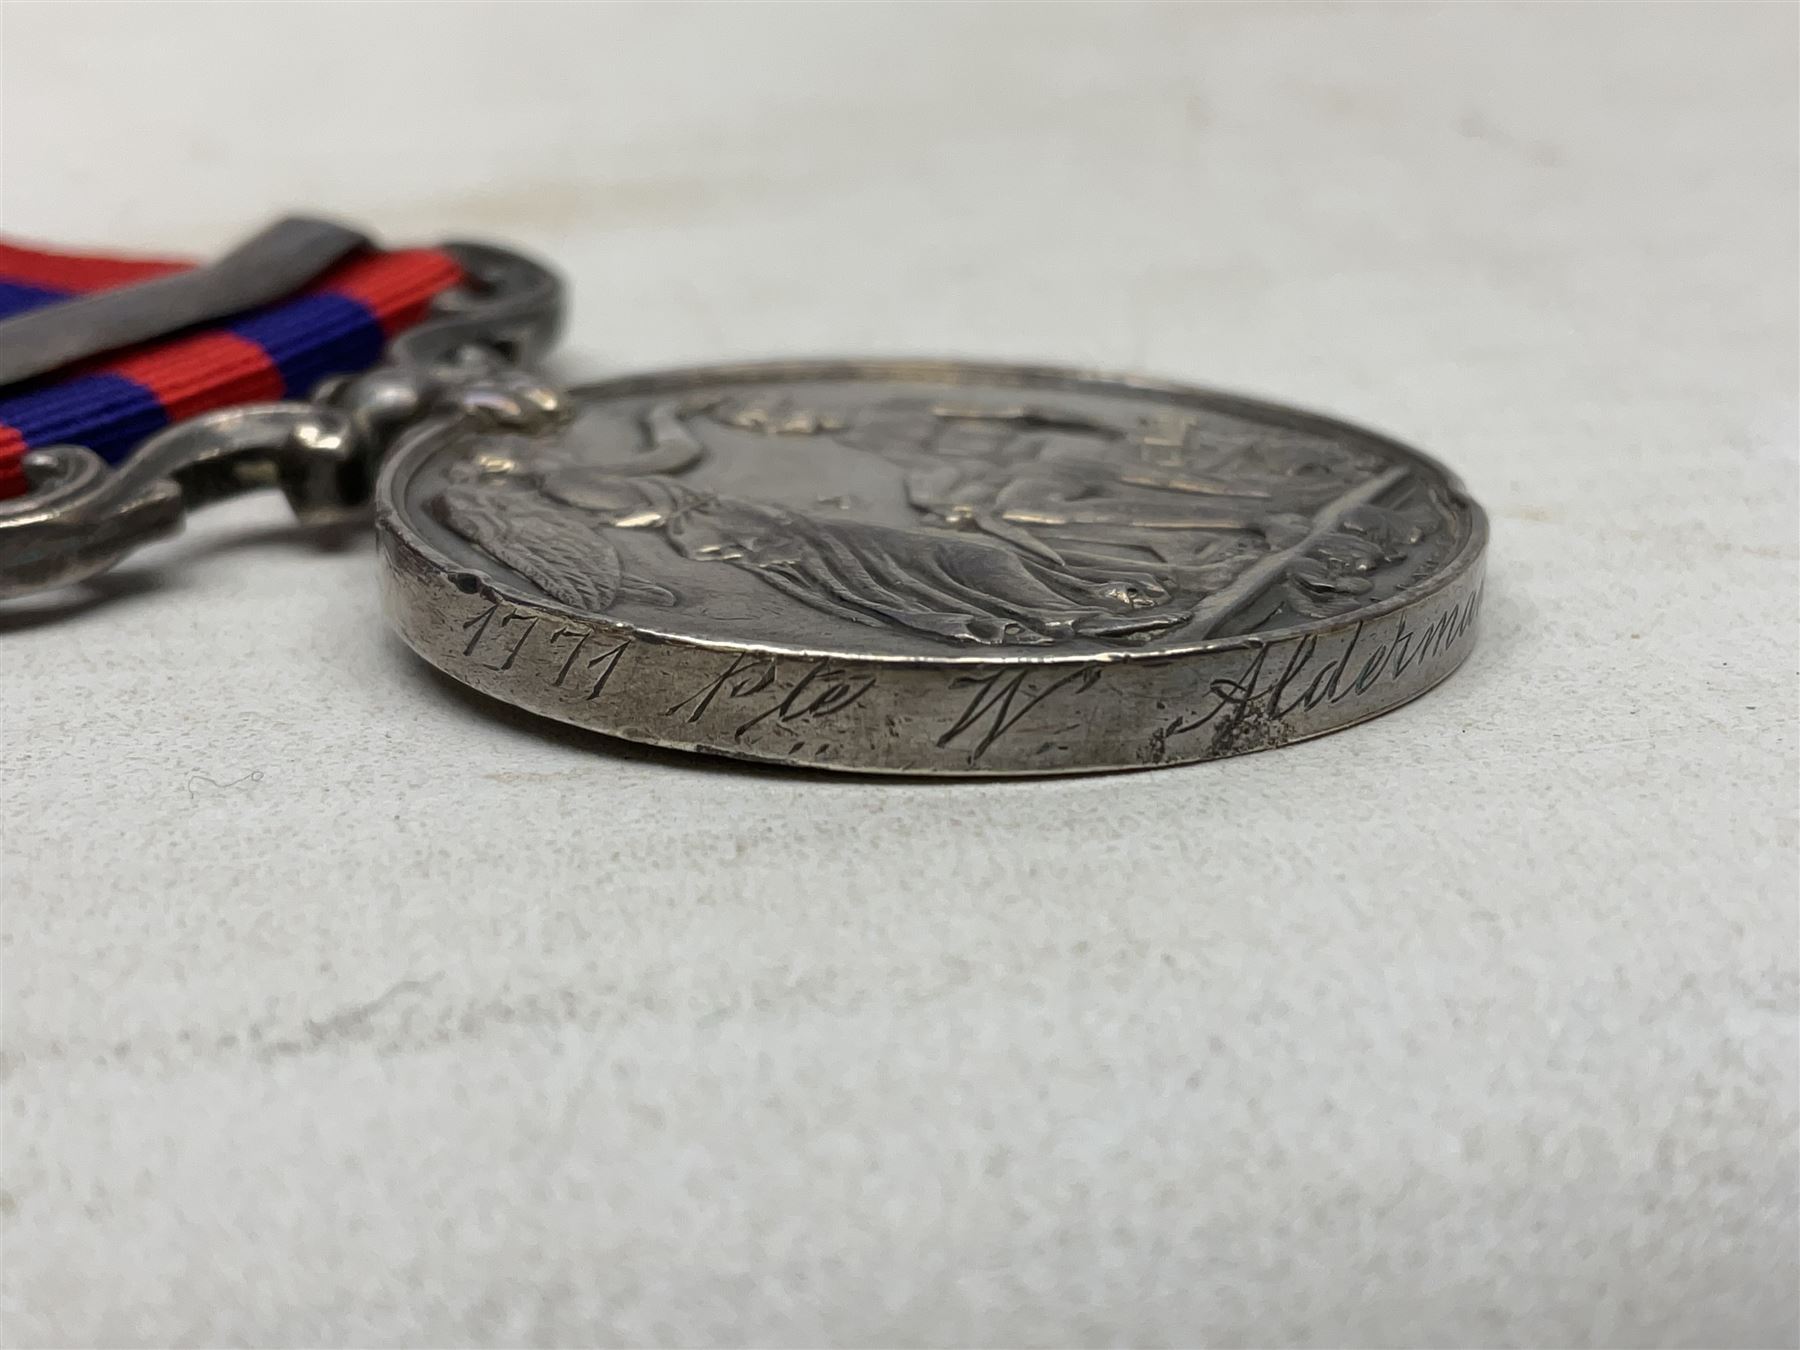 Victoria India General Service Medal with Burma 1885-7 clasp awarded to 1771 Pte. W. Alderman 2nd Bn - Image 8 of 10